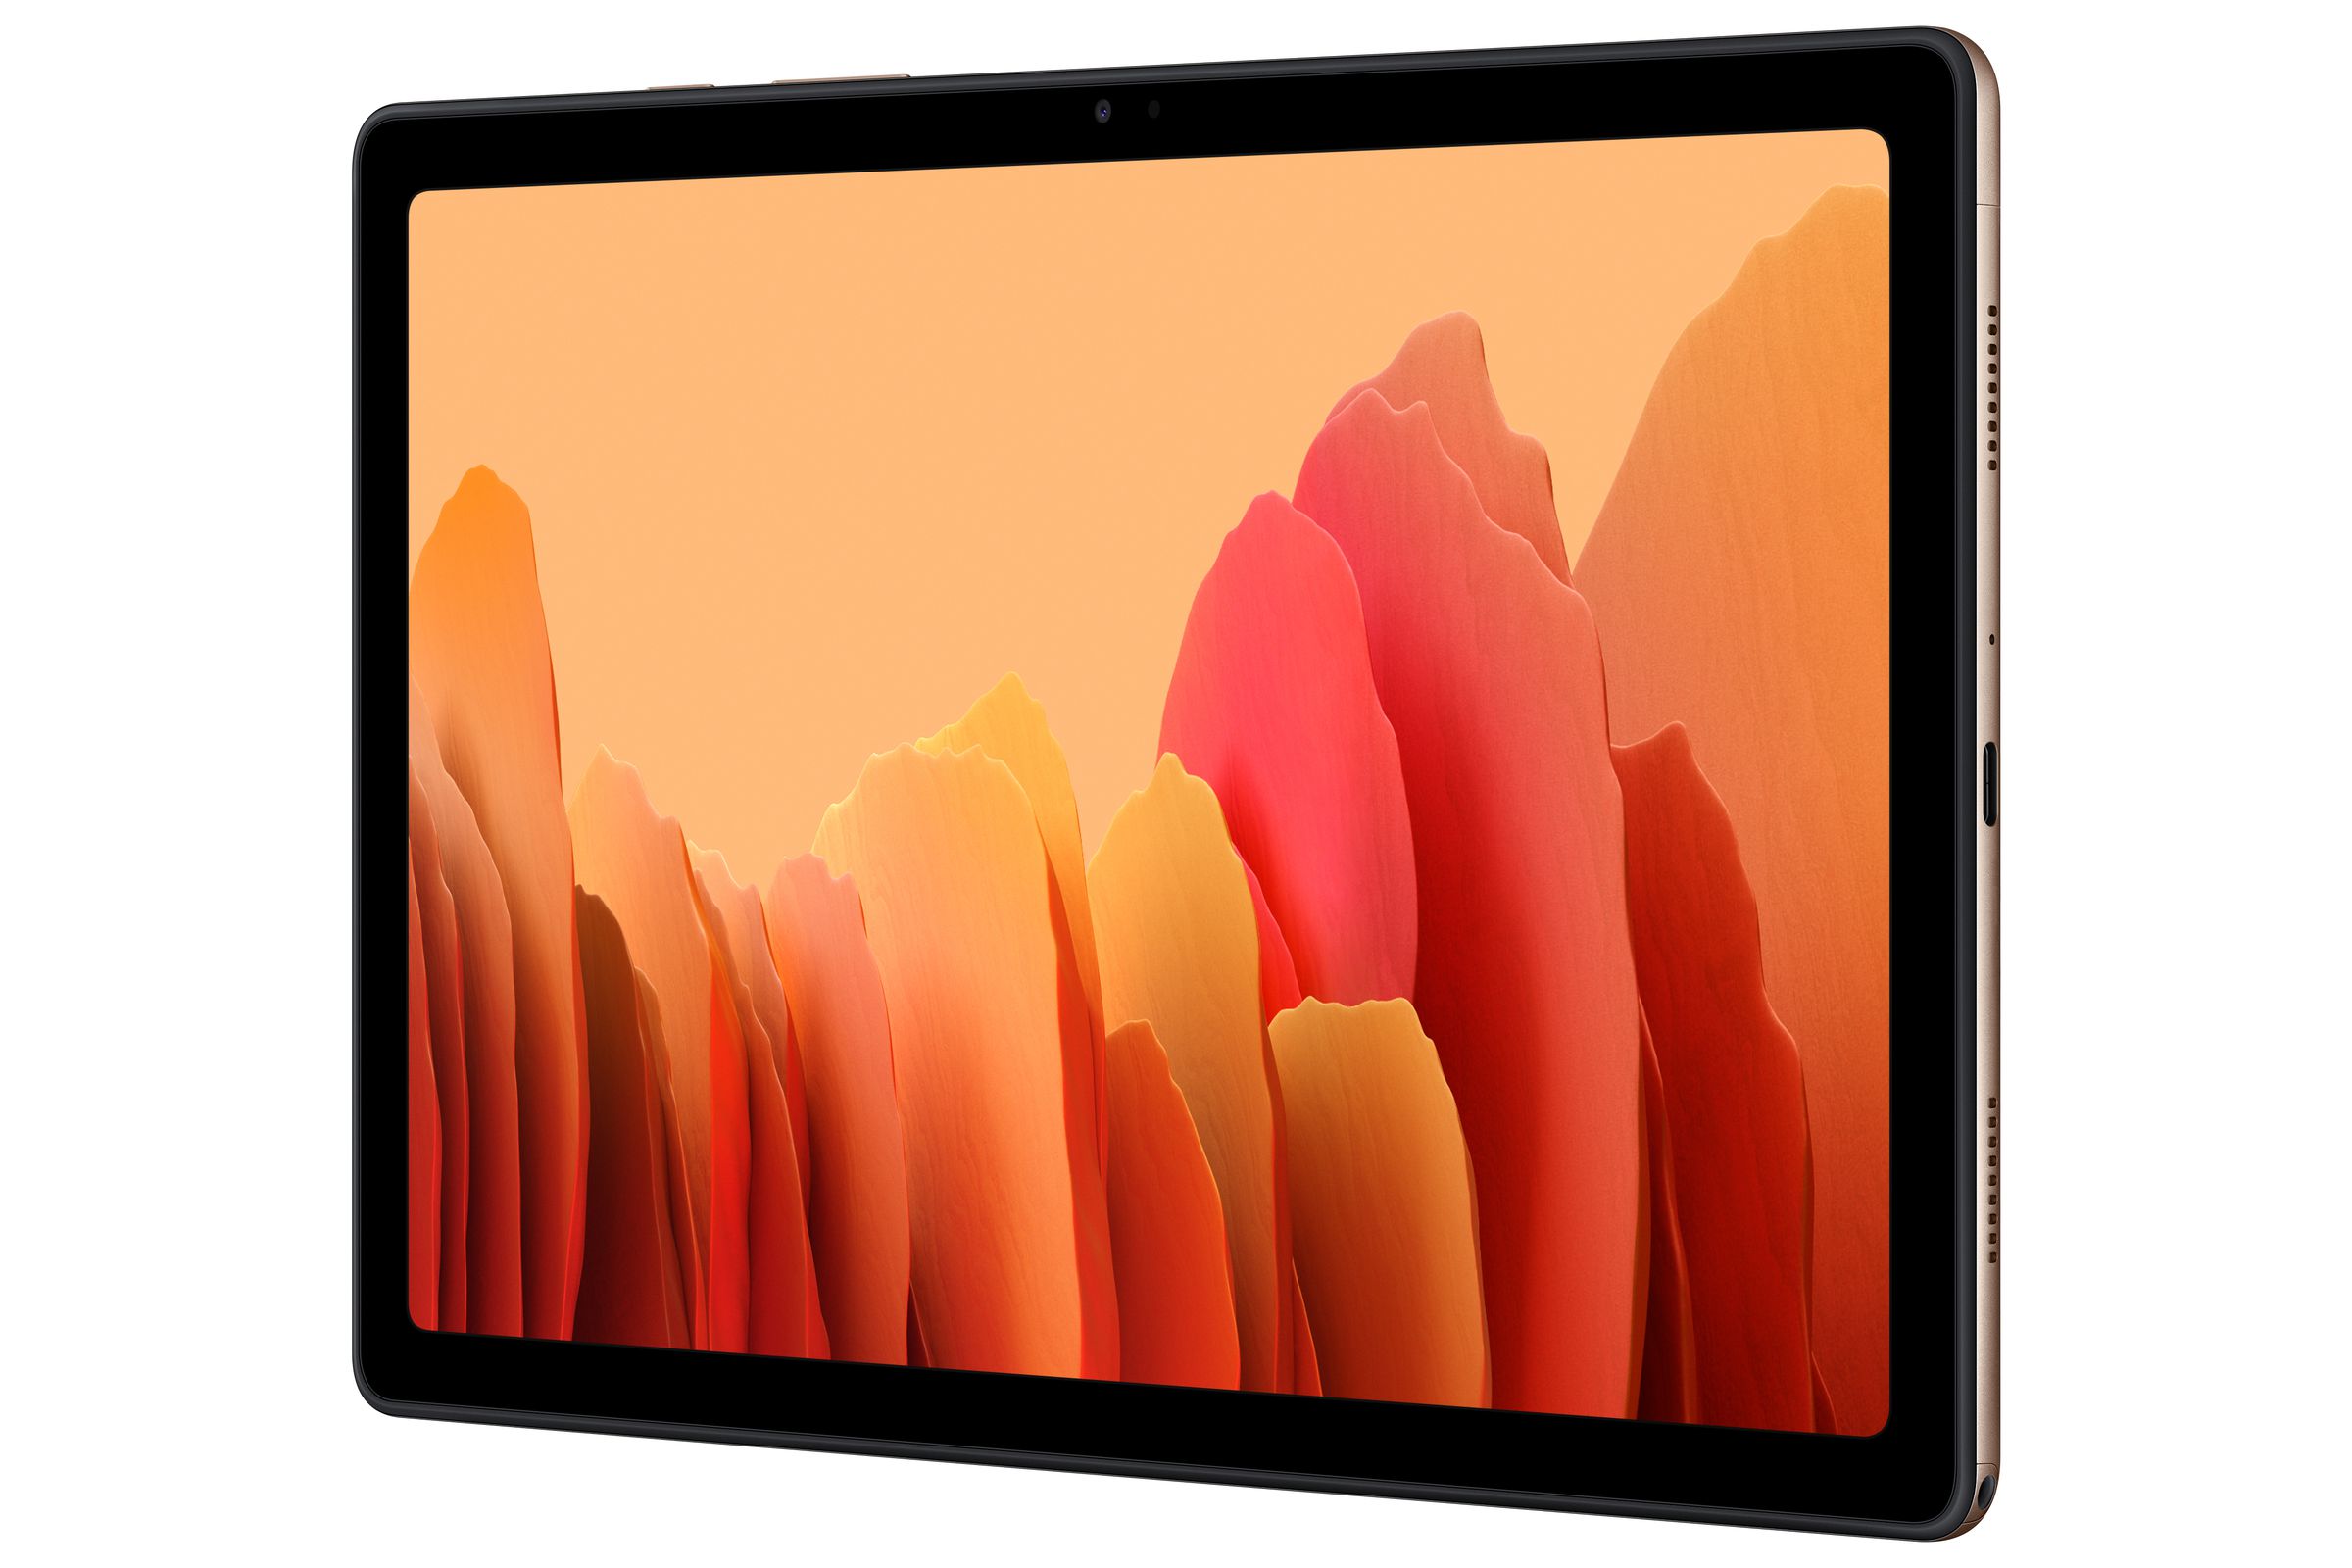 The Galaxy Tab A7 is a new tablet featuring four speakers.